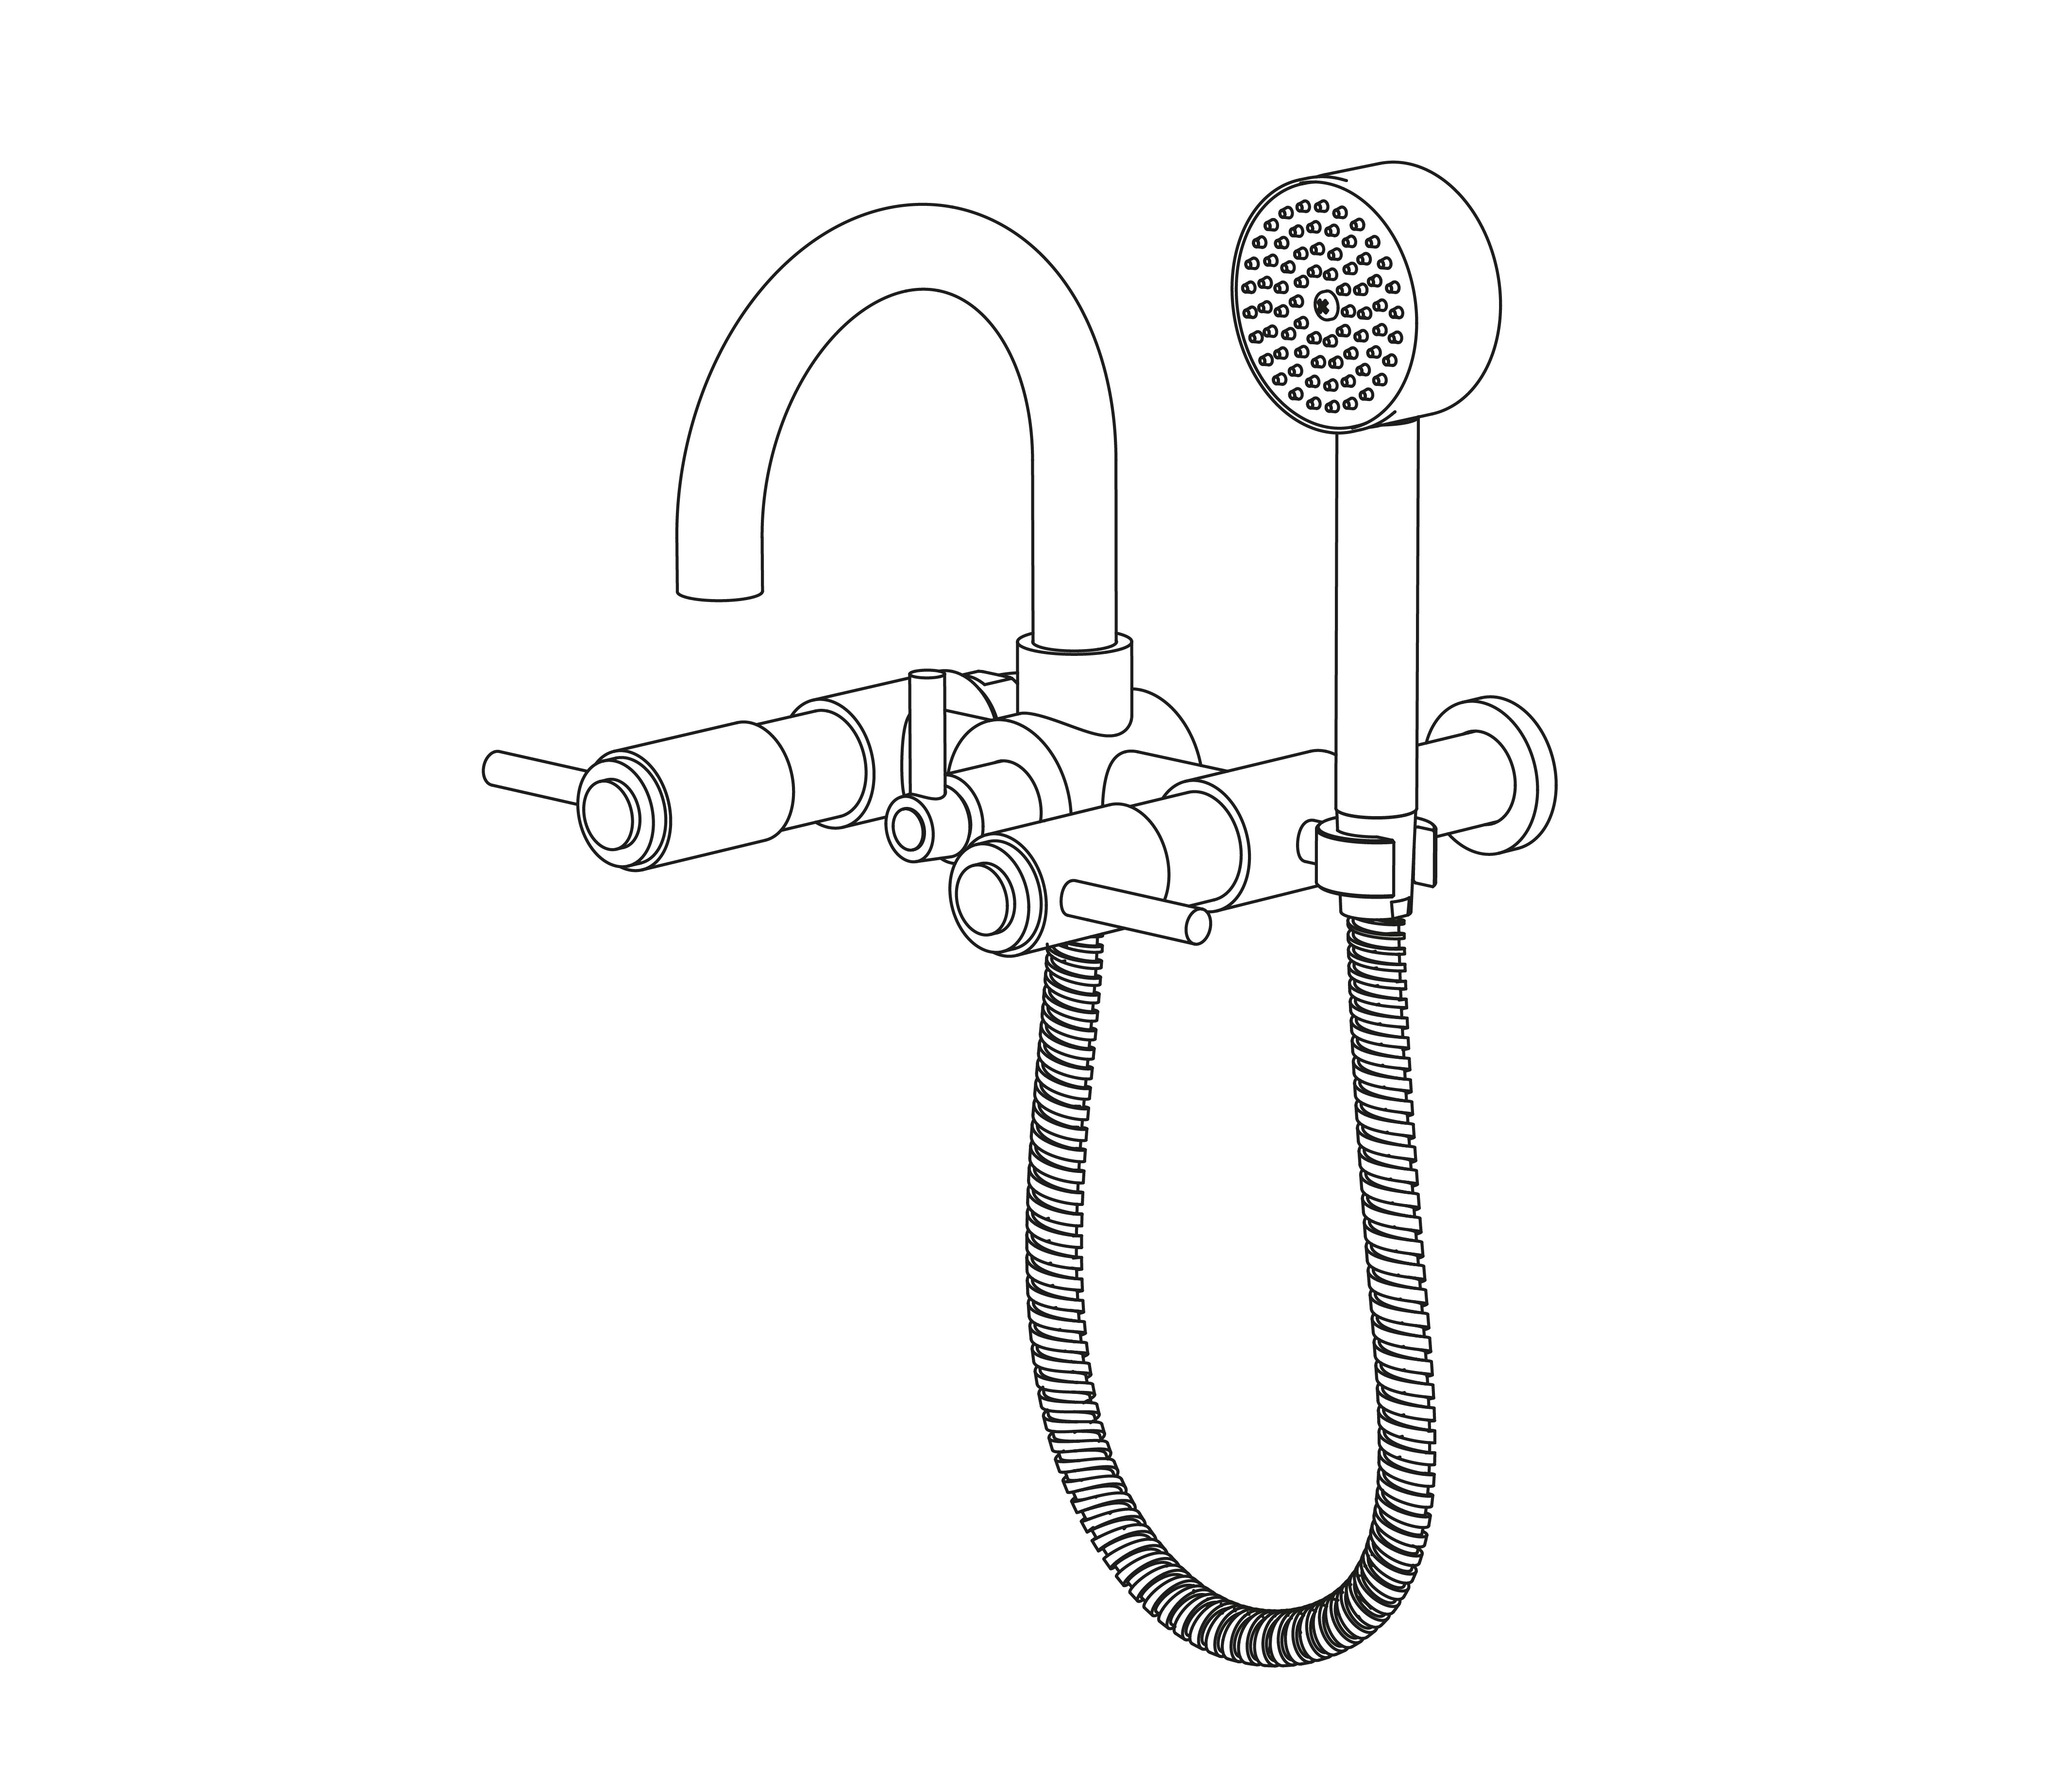 C33-3201 Wall mounted bath and shower mixer